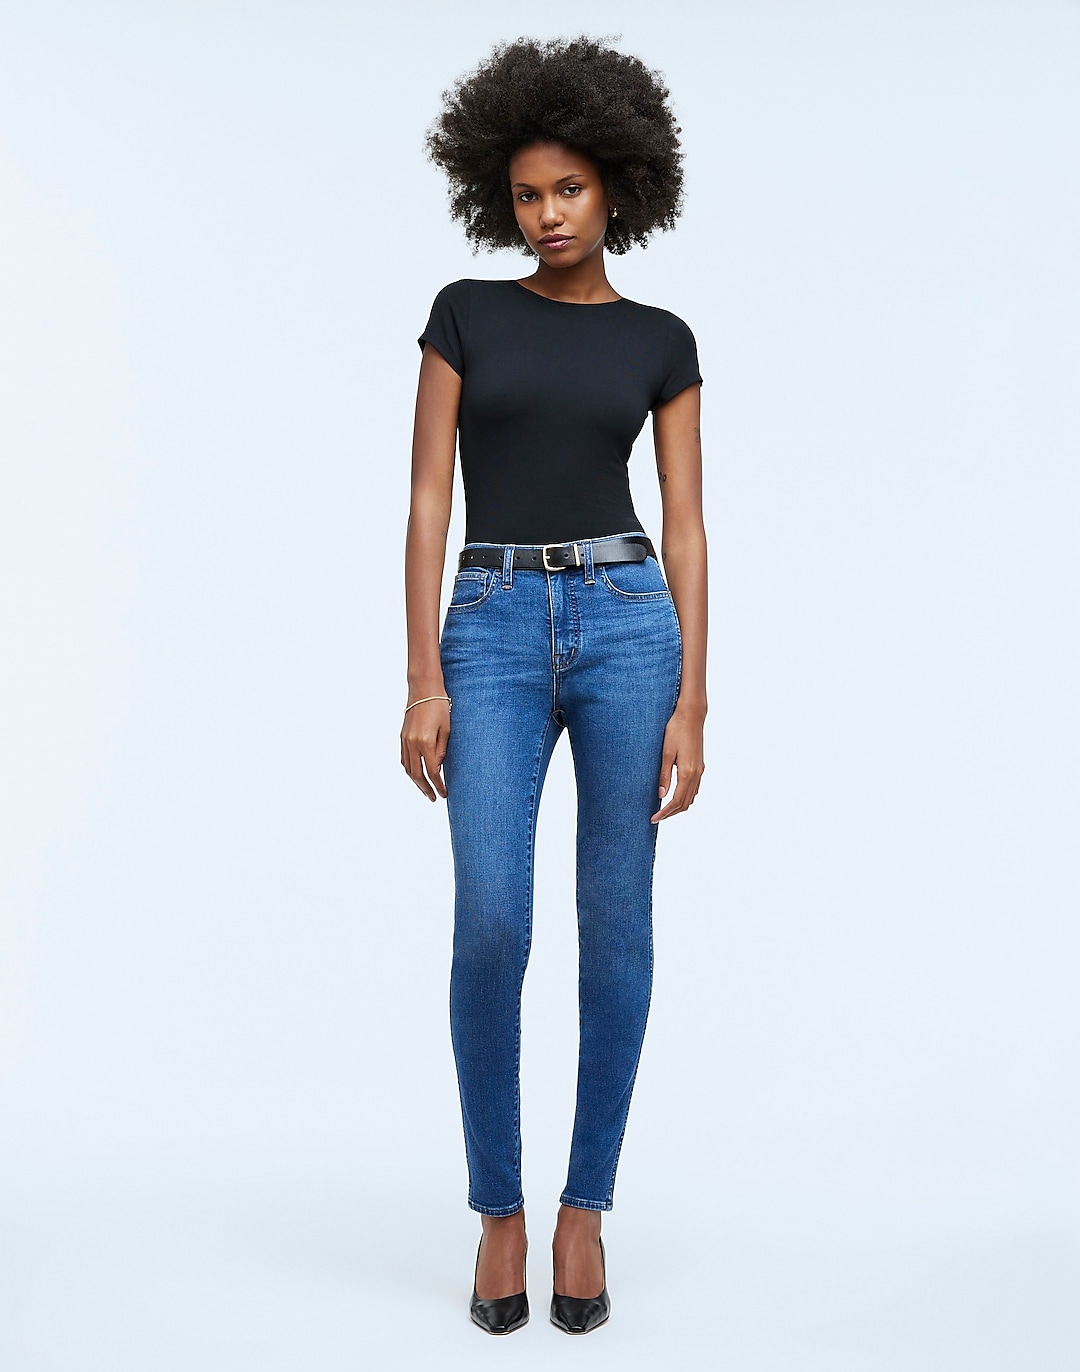 10" High-Rise Roadtripper Authentic Skinny Jeans in Faulkner Wash | Madewell